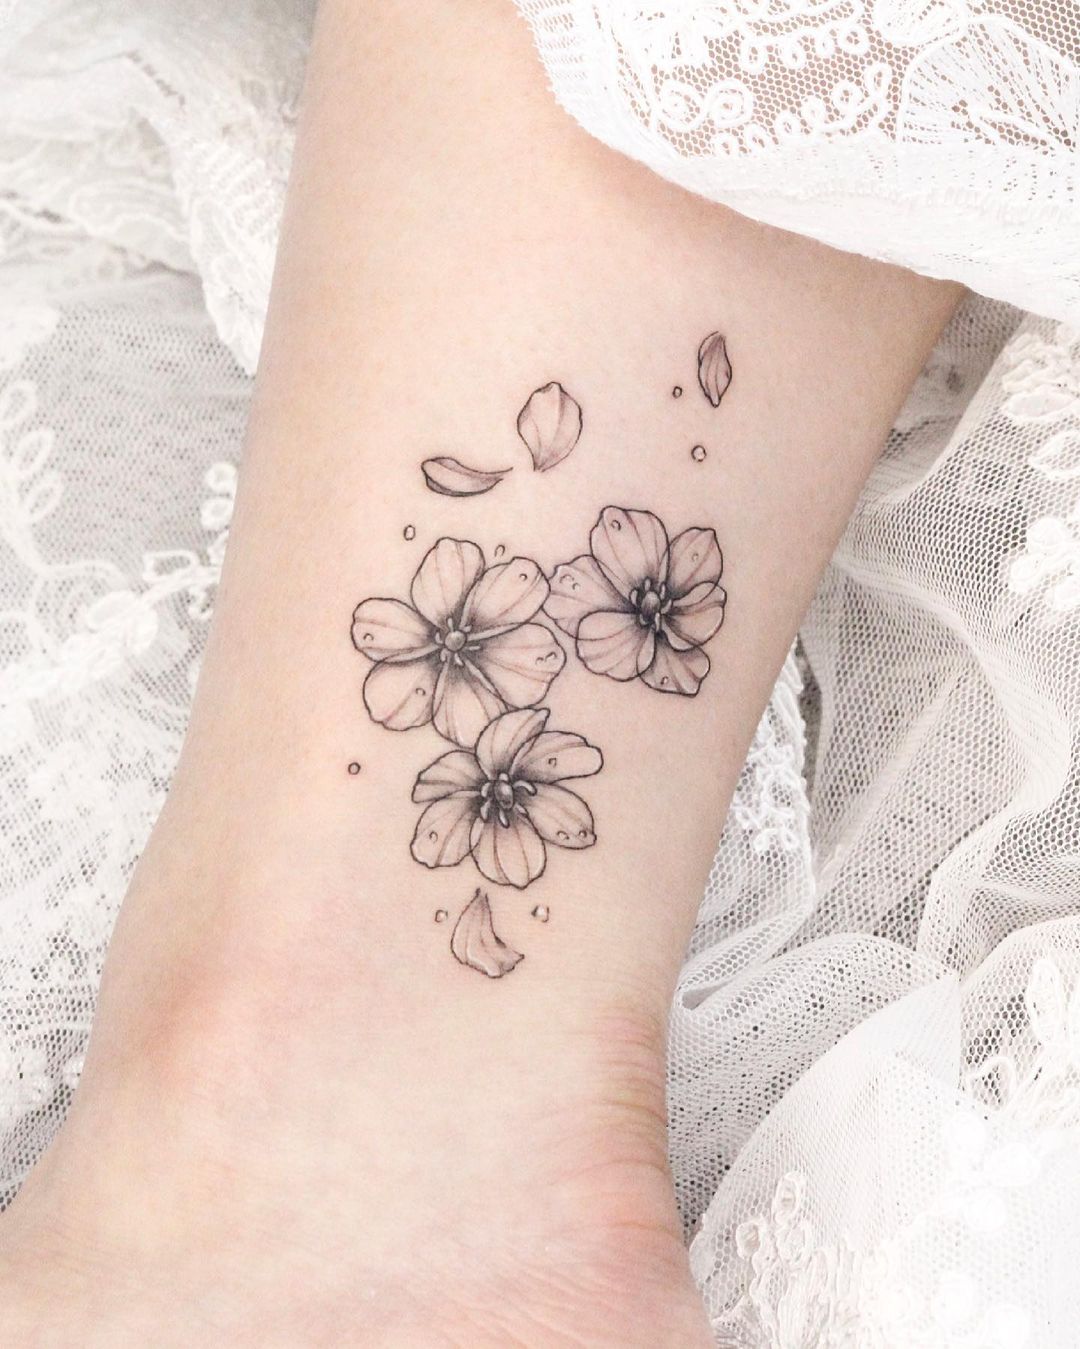 60+ Flower Tattoo Ideas That Will Leave You Feeling Inspired - 100 Tattoos